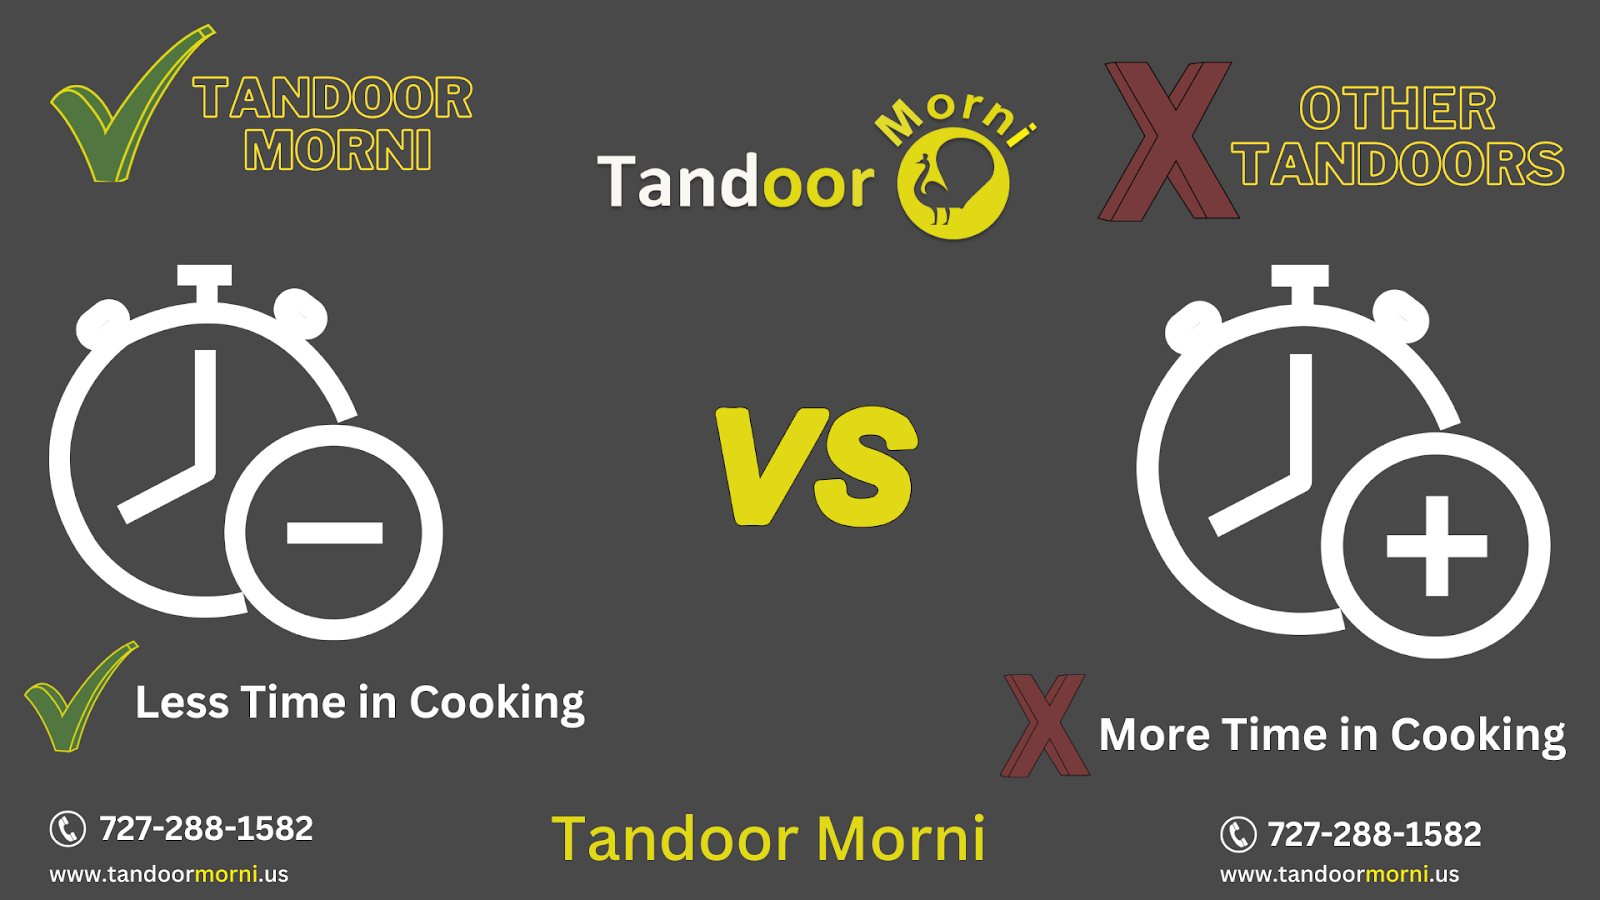 Tandoor morni needs the least amount of time to prepare, while other tandoors require more time.